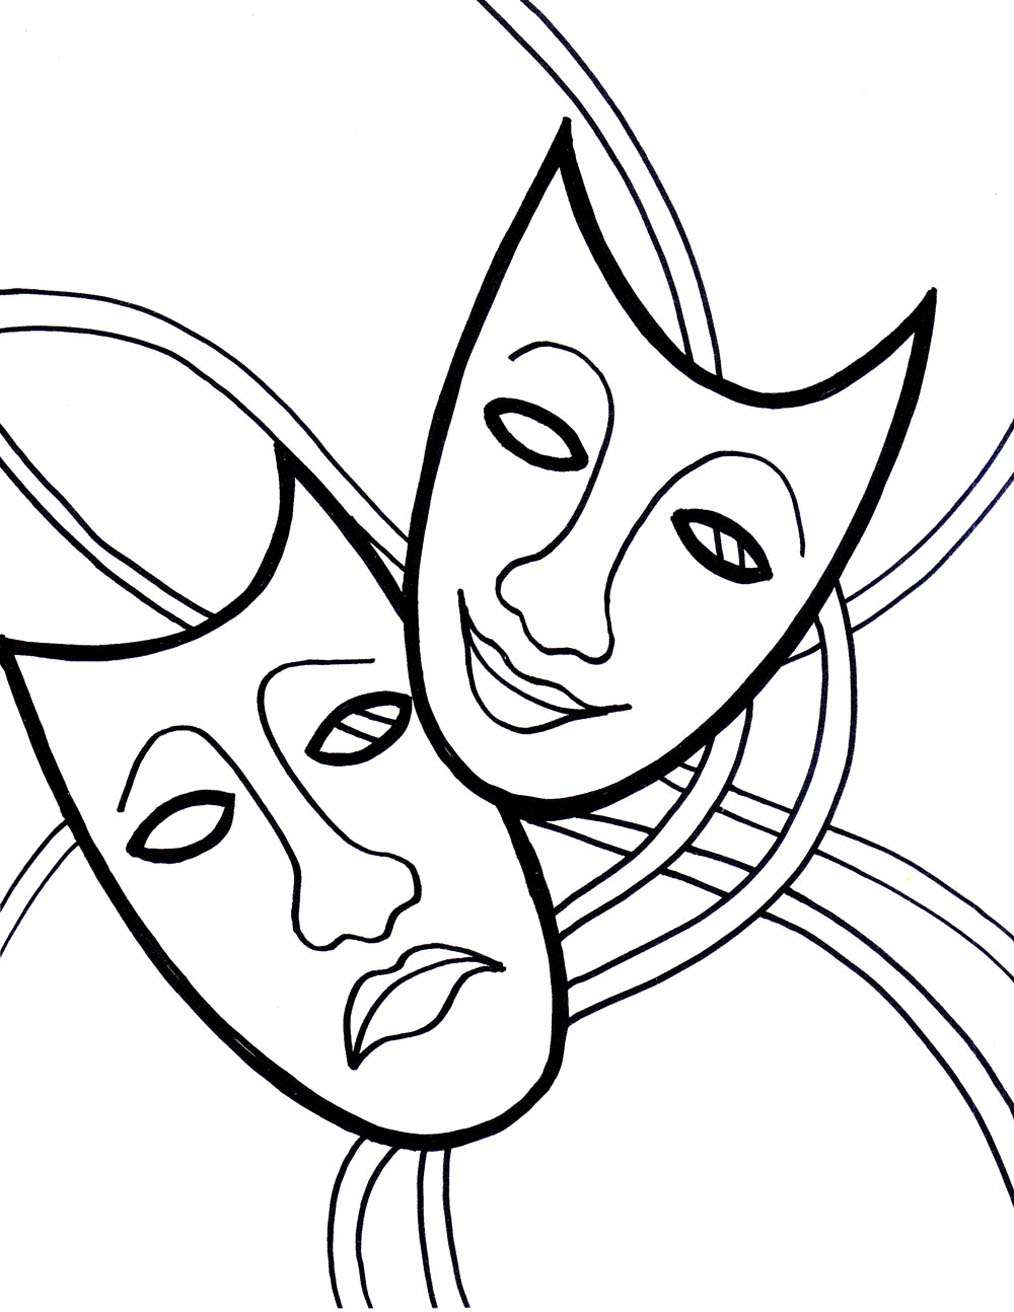 Carnival Image To Download And Color Carnival Kids Coloring Pages